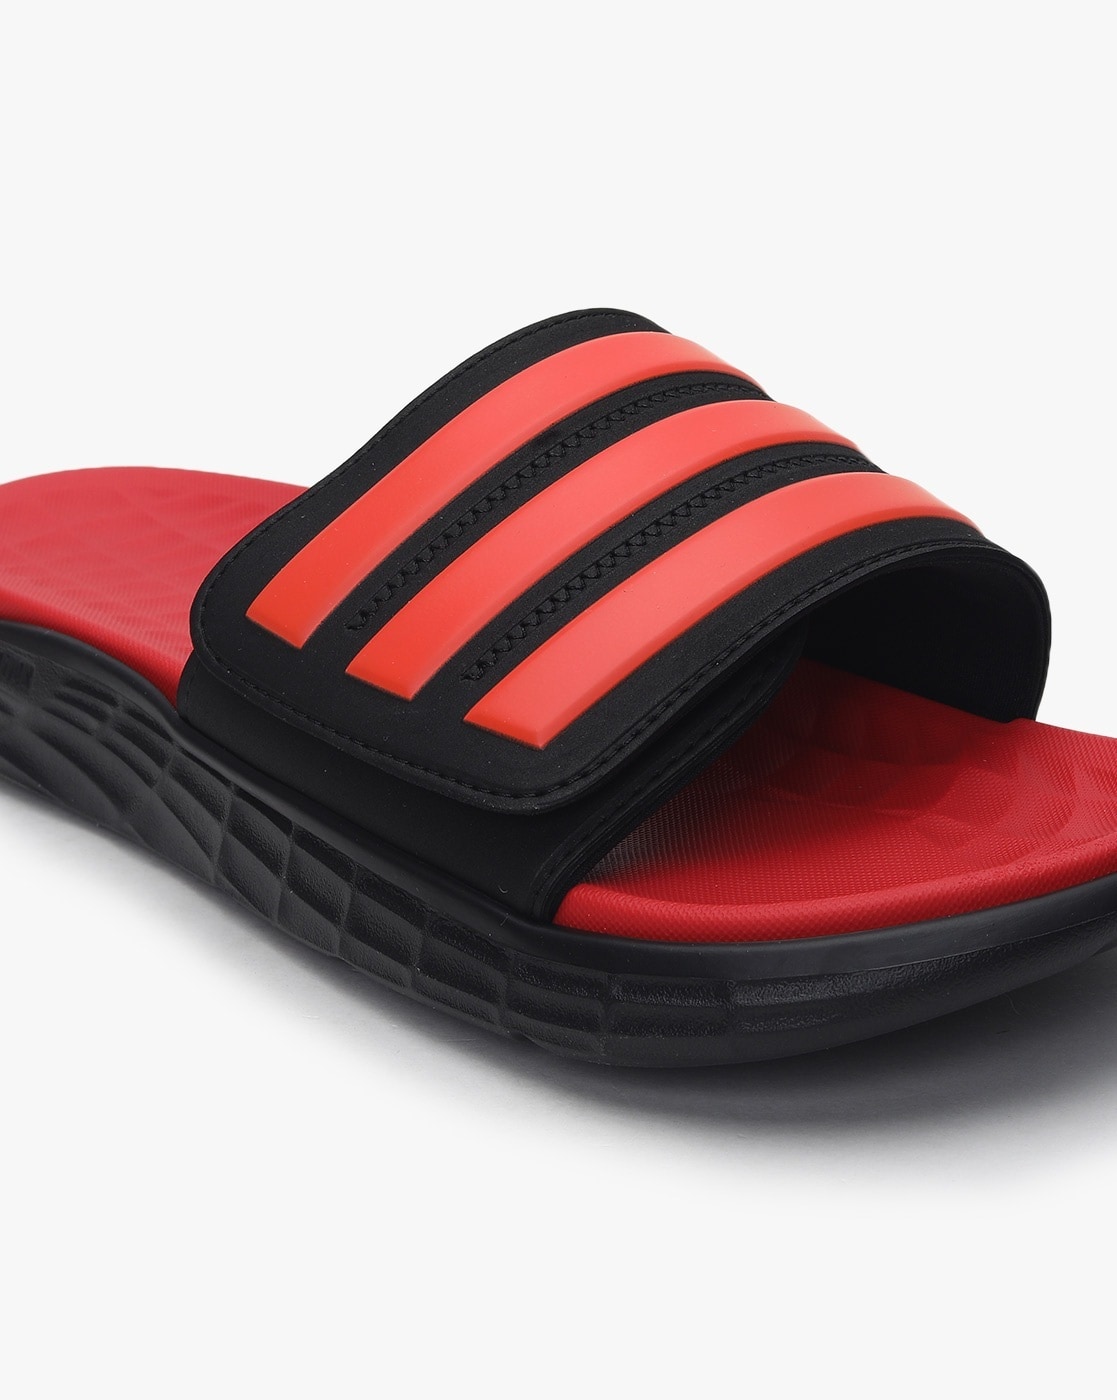 Buy Adidas Duramo Slide from £9.00 (Today) – Best Deals on idealo.co.uk